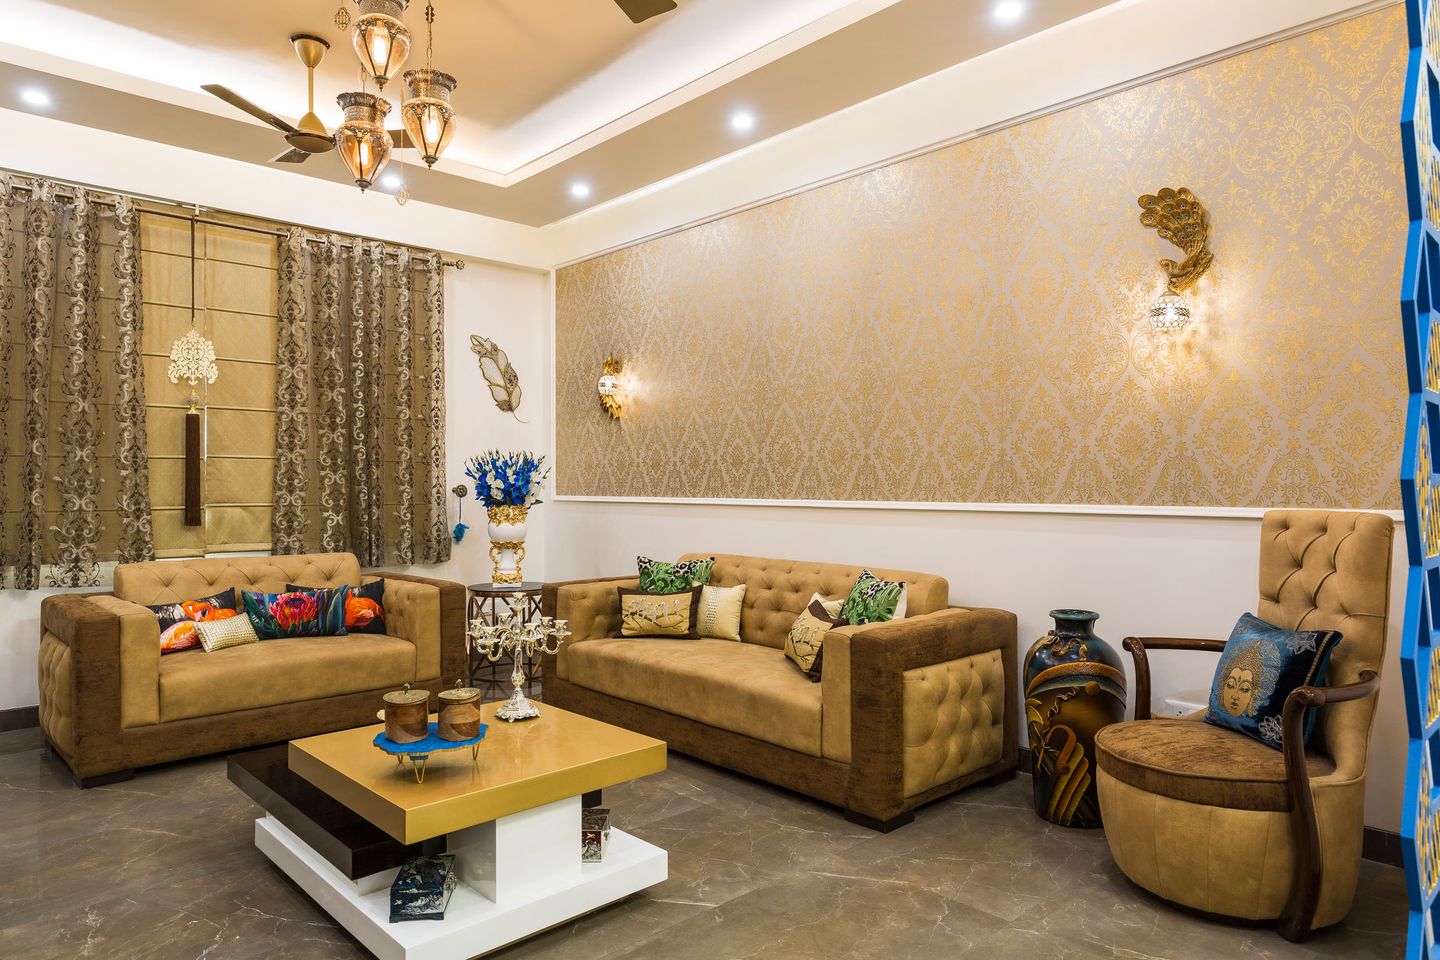 Gold-Toned Living Room Design With Beige And Brown Sofas And Damask ...